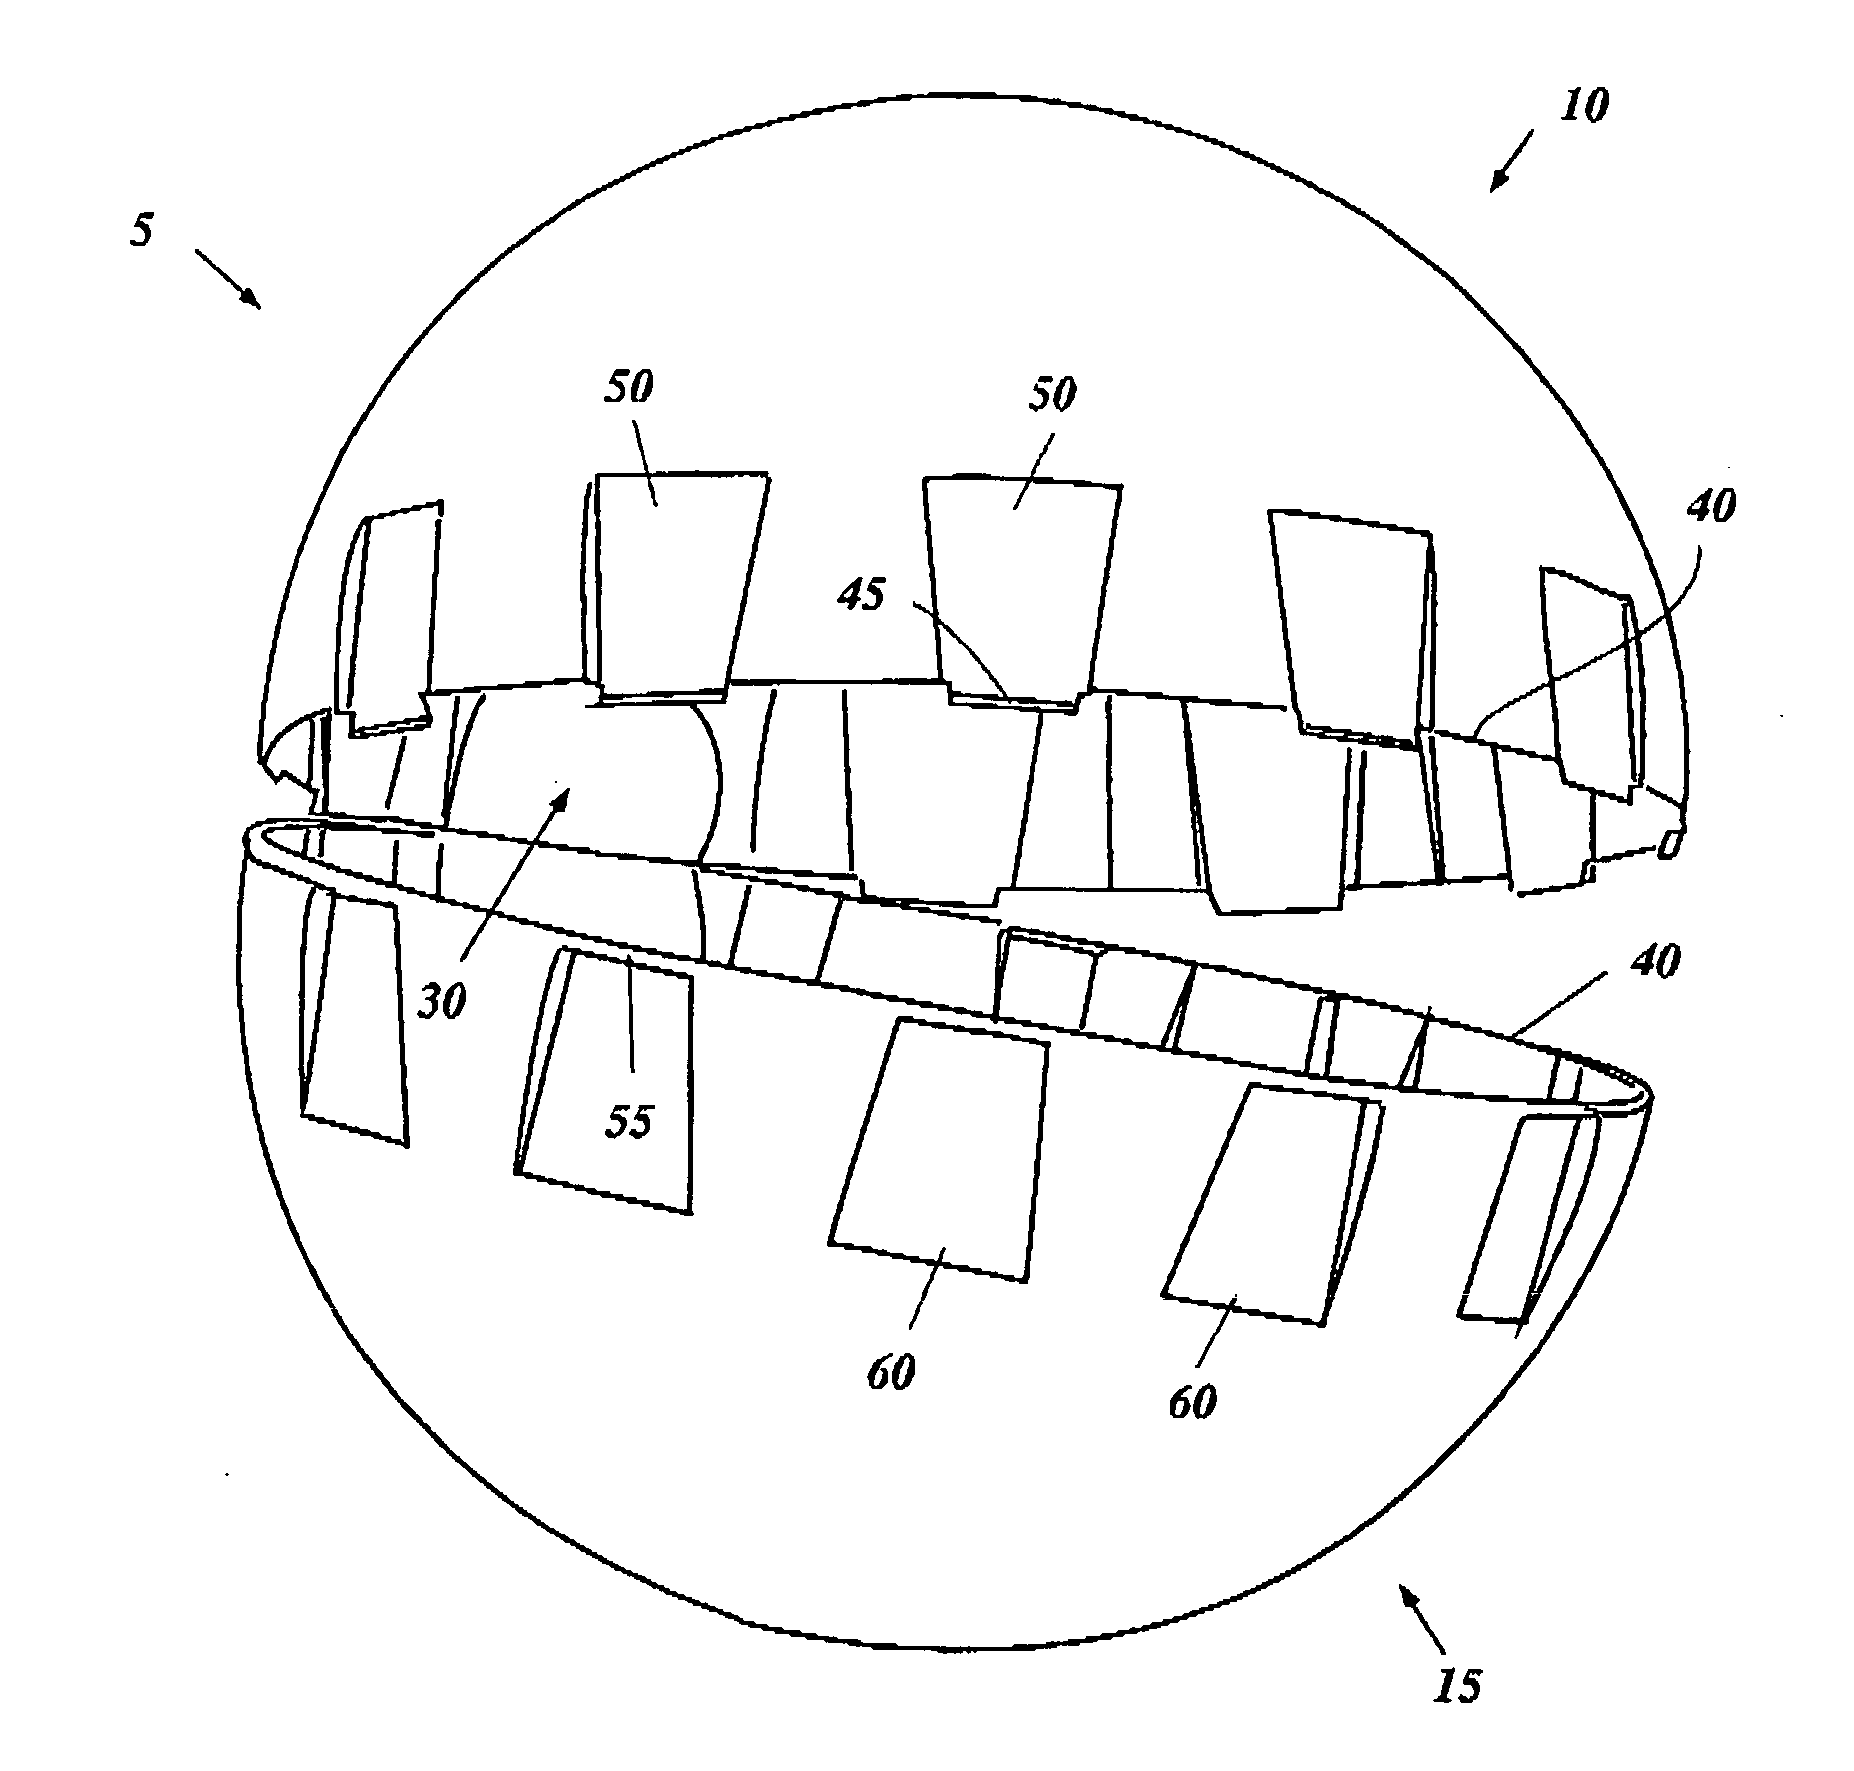 Nestable structural hollow body and related methods